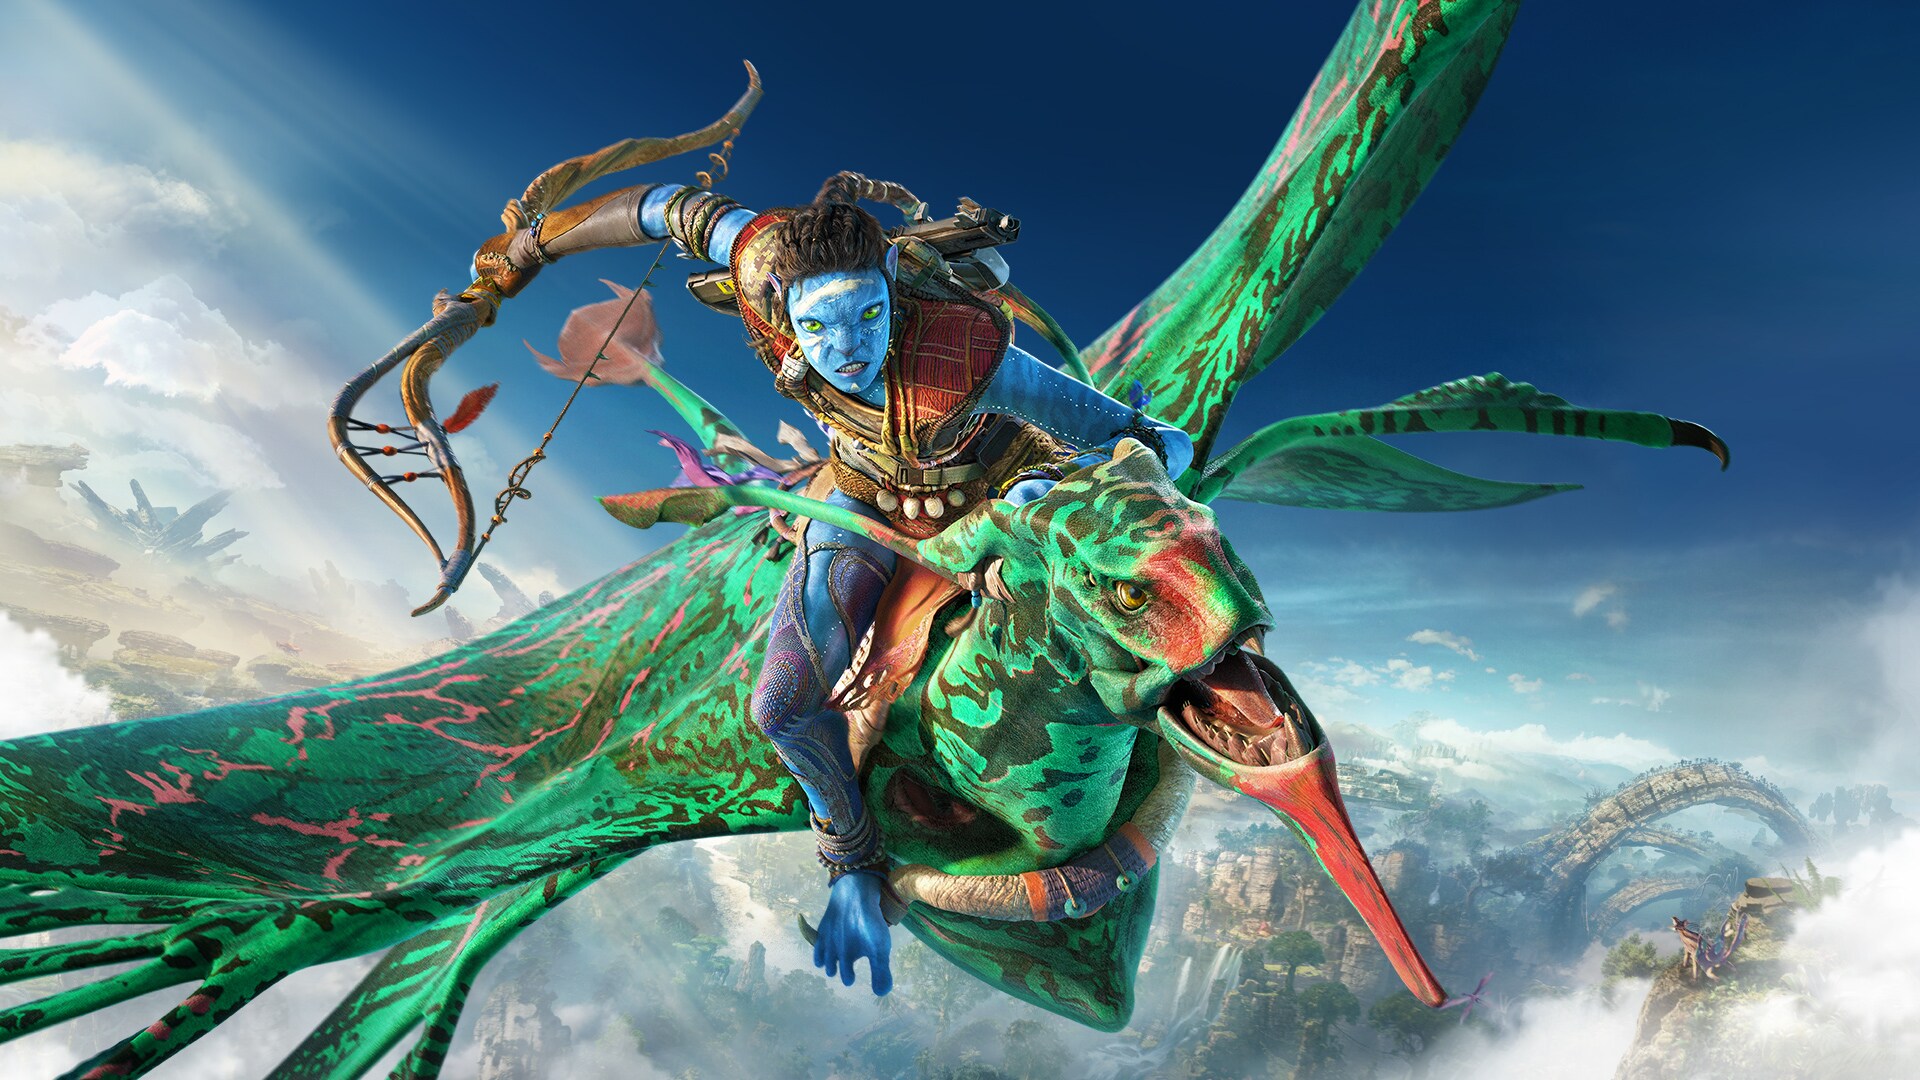 Avatar: Frontiers of Pandora Ultimate Edition (Digital Download